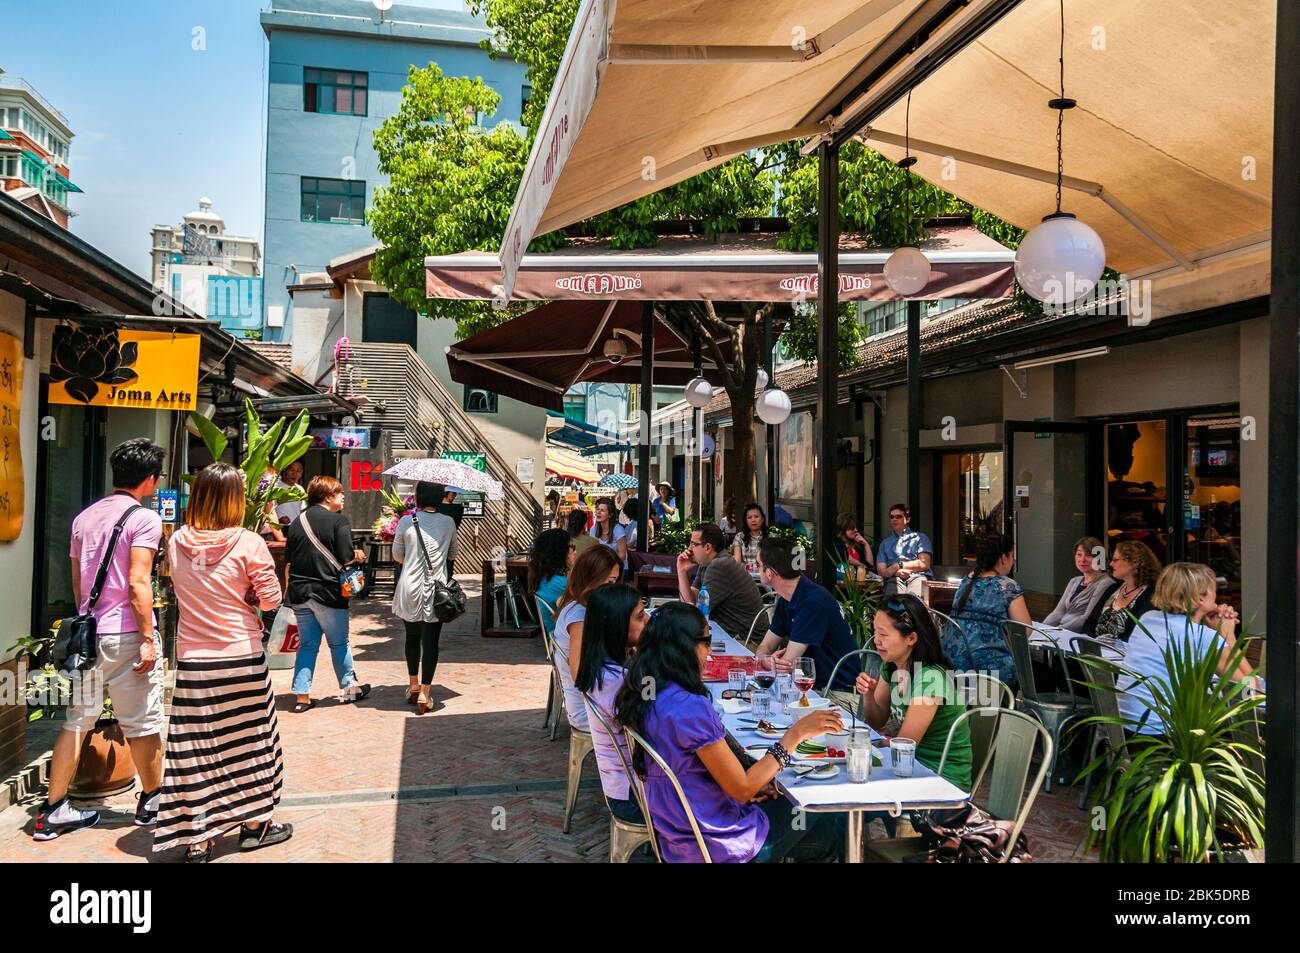 People relaxing in the shade of umbrellas on a beautiful spring day at the Kommune café in Tianzifang, Shanghai, China. Stock Photo